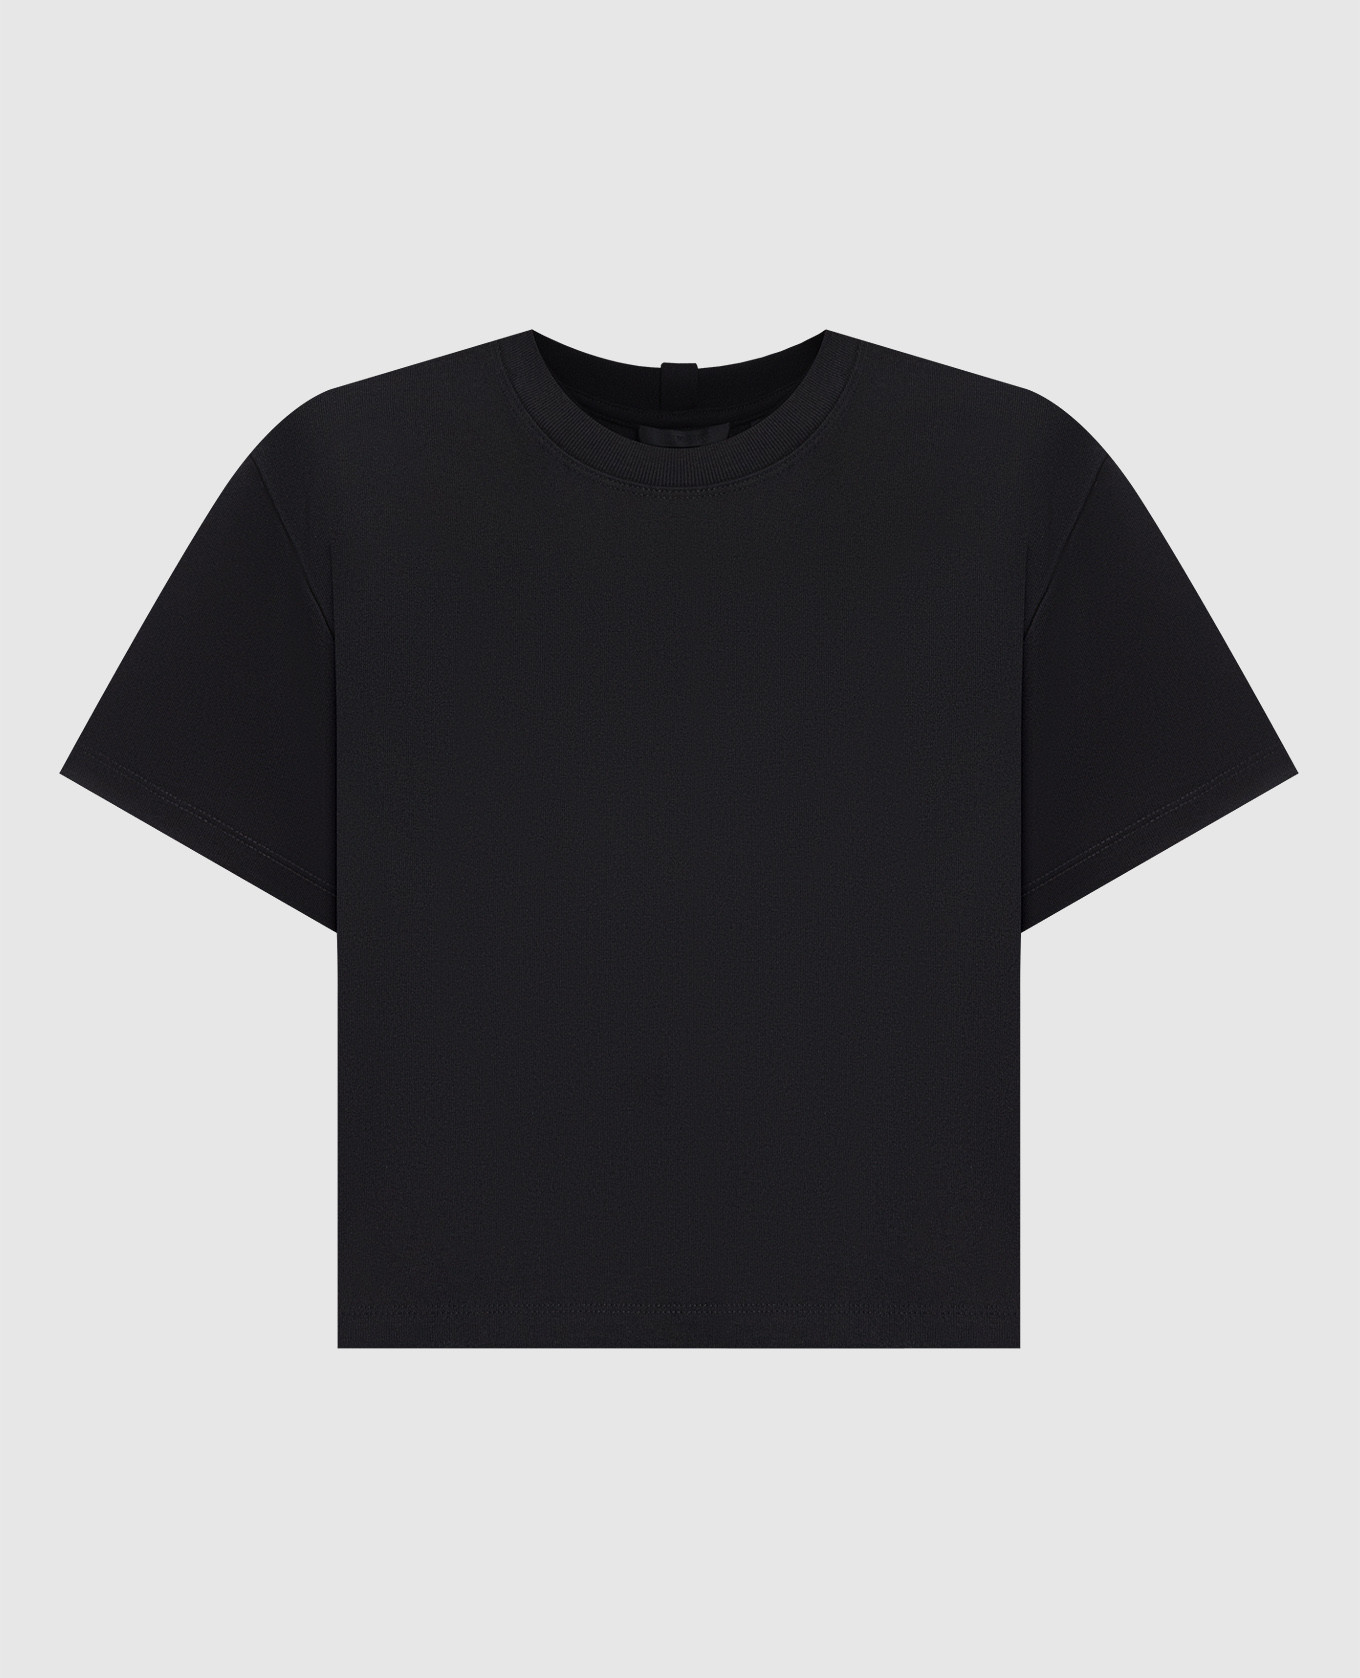 Black t-shirt with textured logo